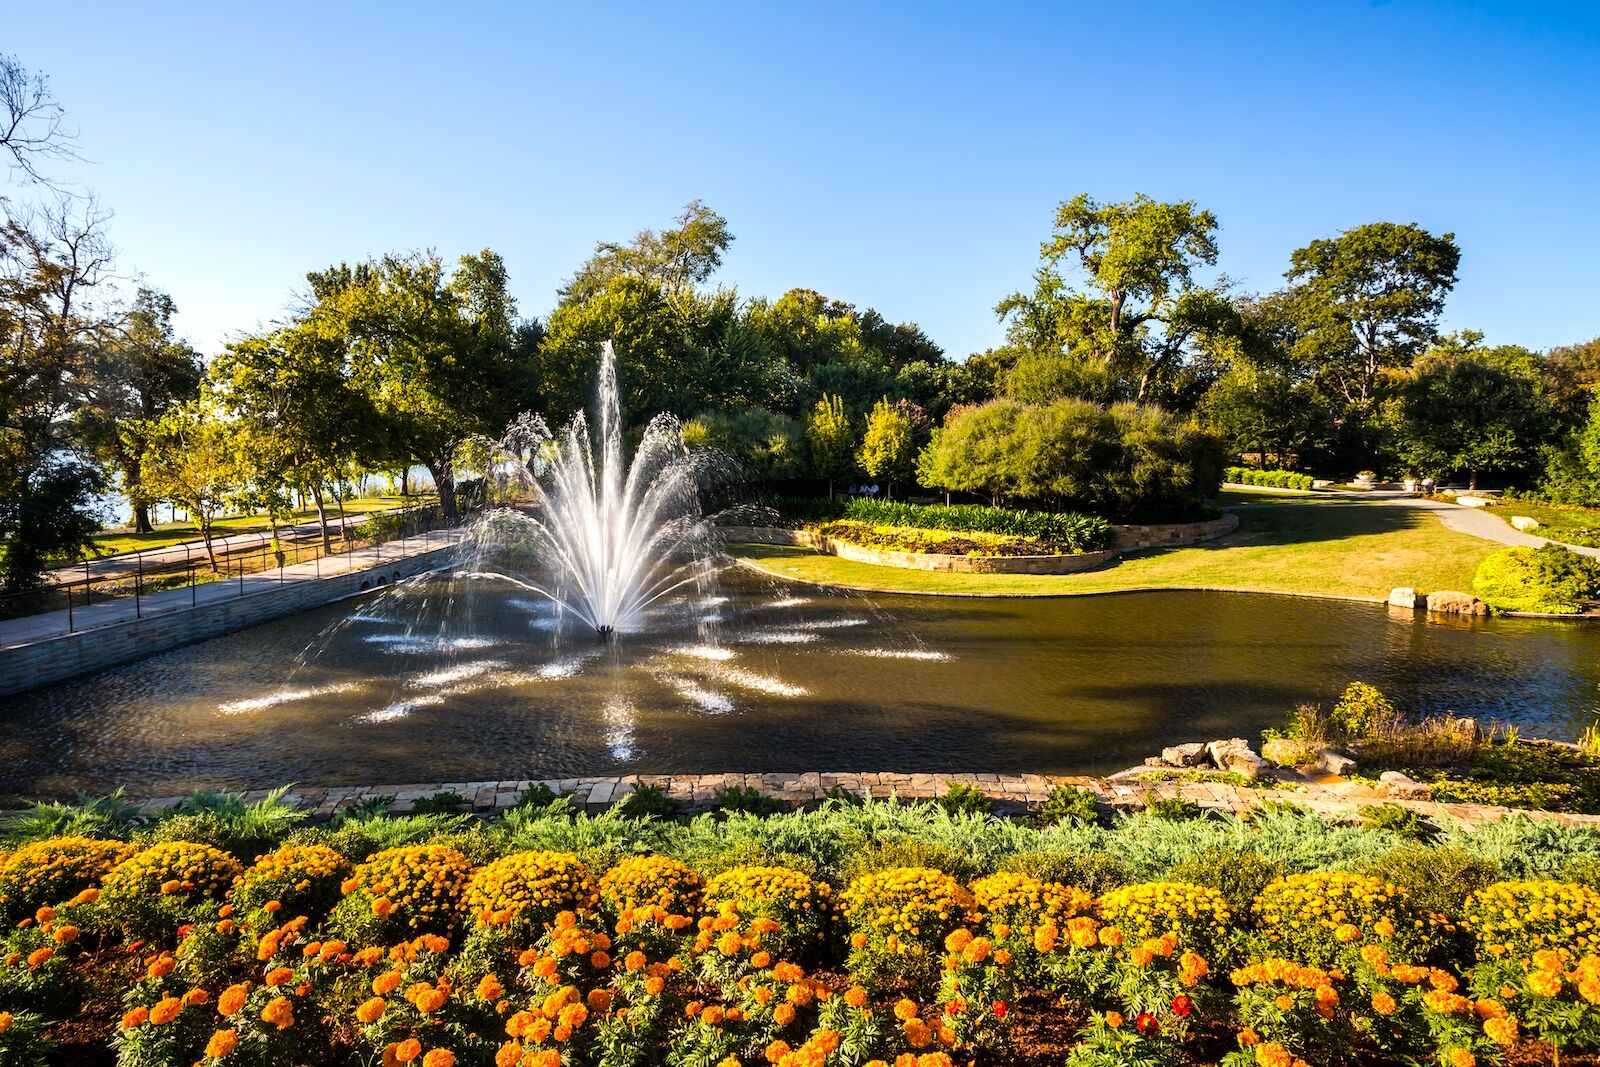 Fountain at the Dallas Arboretum and Botanical Garden